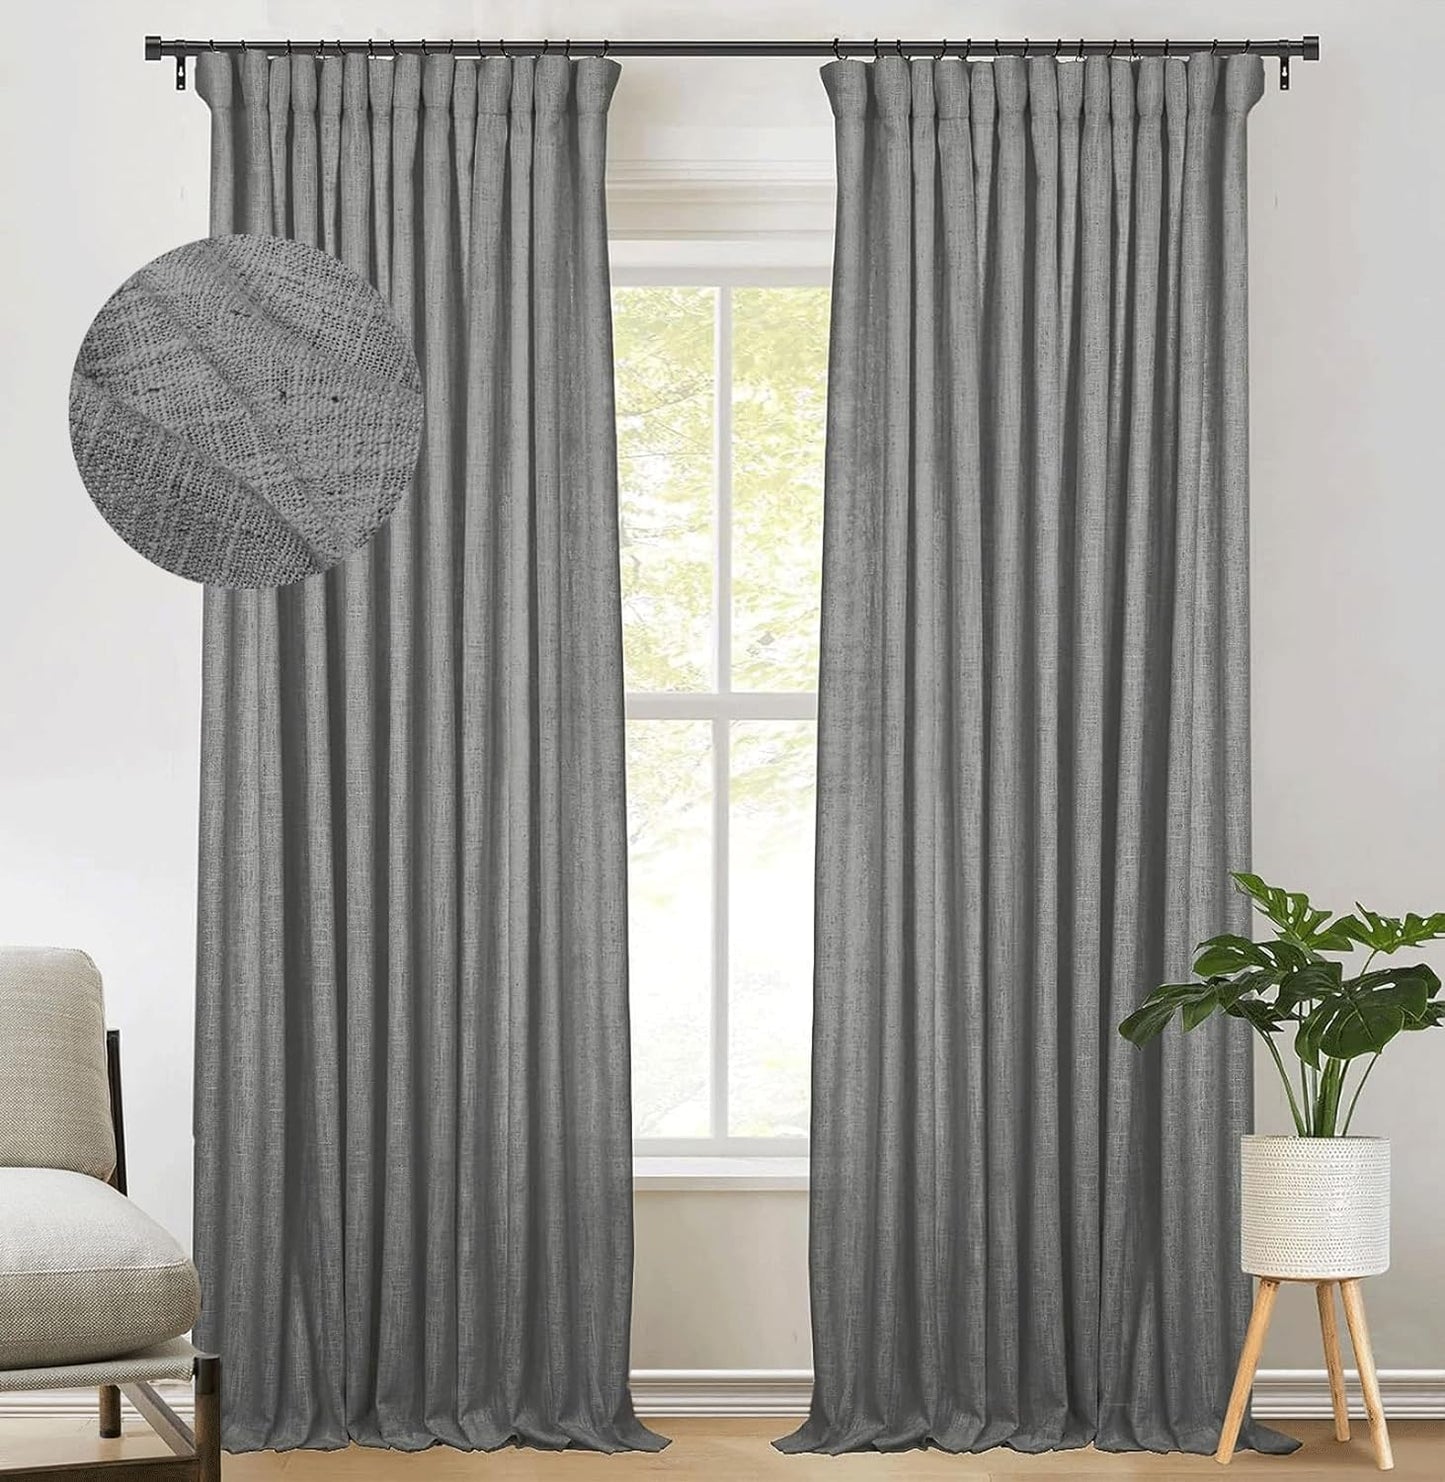 Zeerobee Beige White Linen Curtains for Living Room/Bedroom Linen Curtains 96 Inches Long 2 Panels Linen Drapes Farmhouse Pinch Pleated Curtains Light Filtering Privacy Curtains, W50 X L96  zeerobee 11 Flagstone 50"W X 84"L 